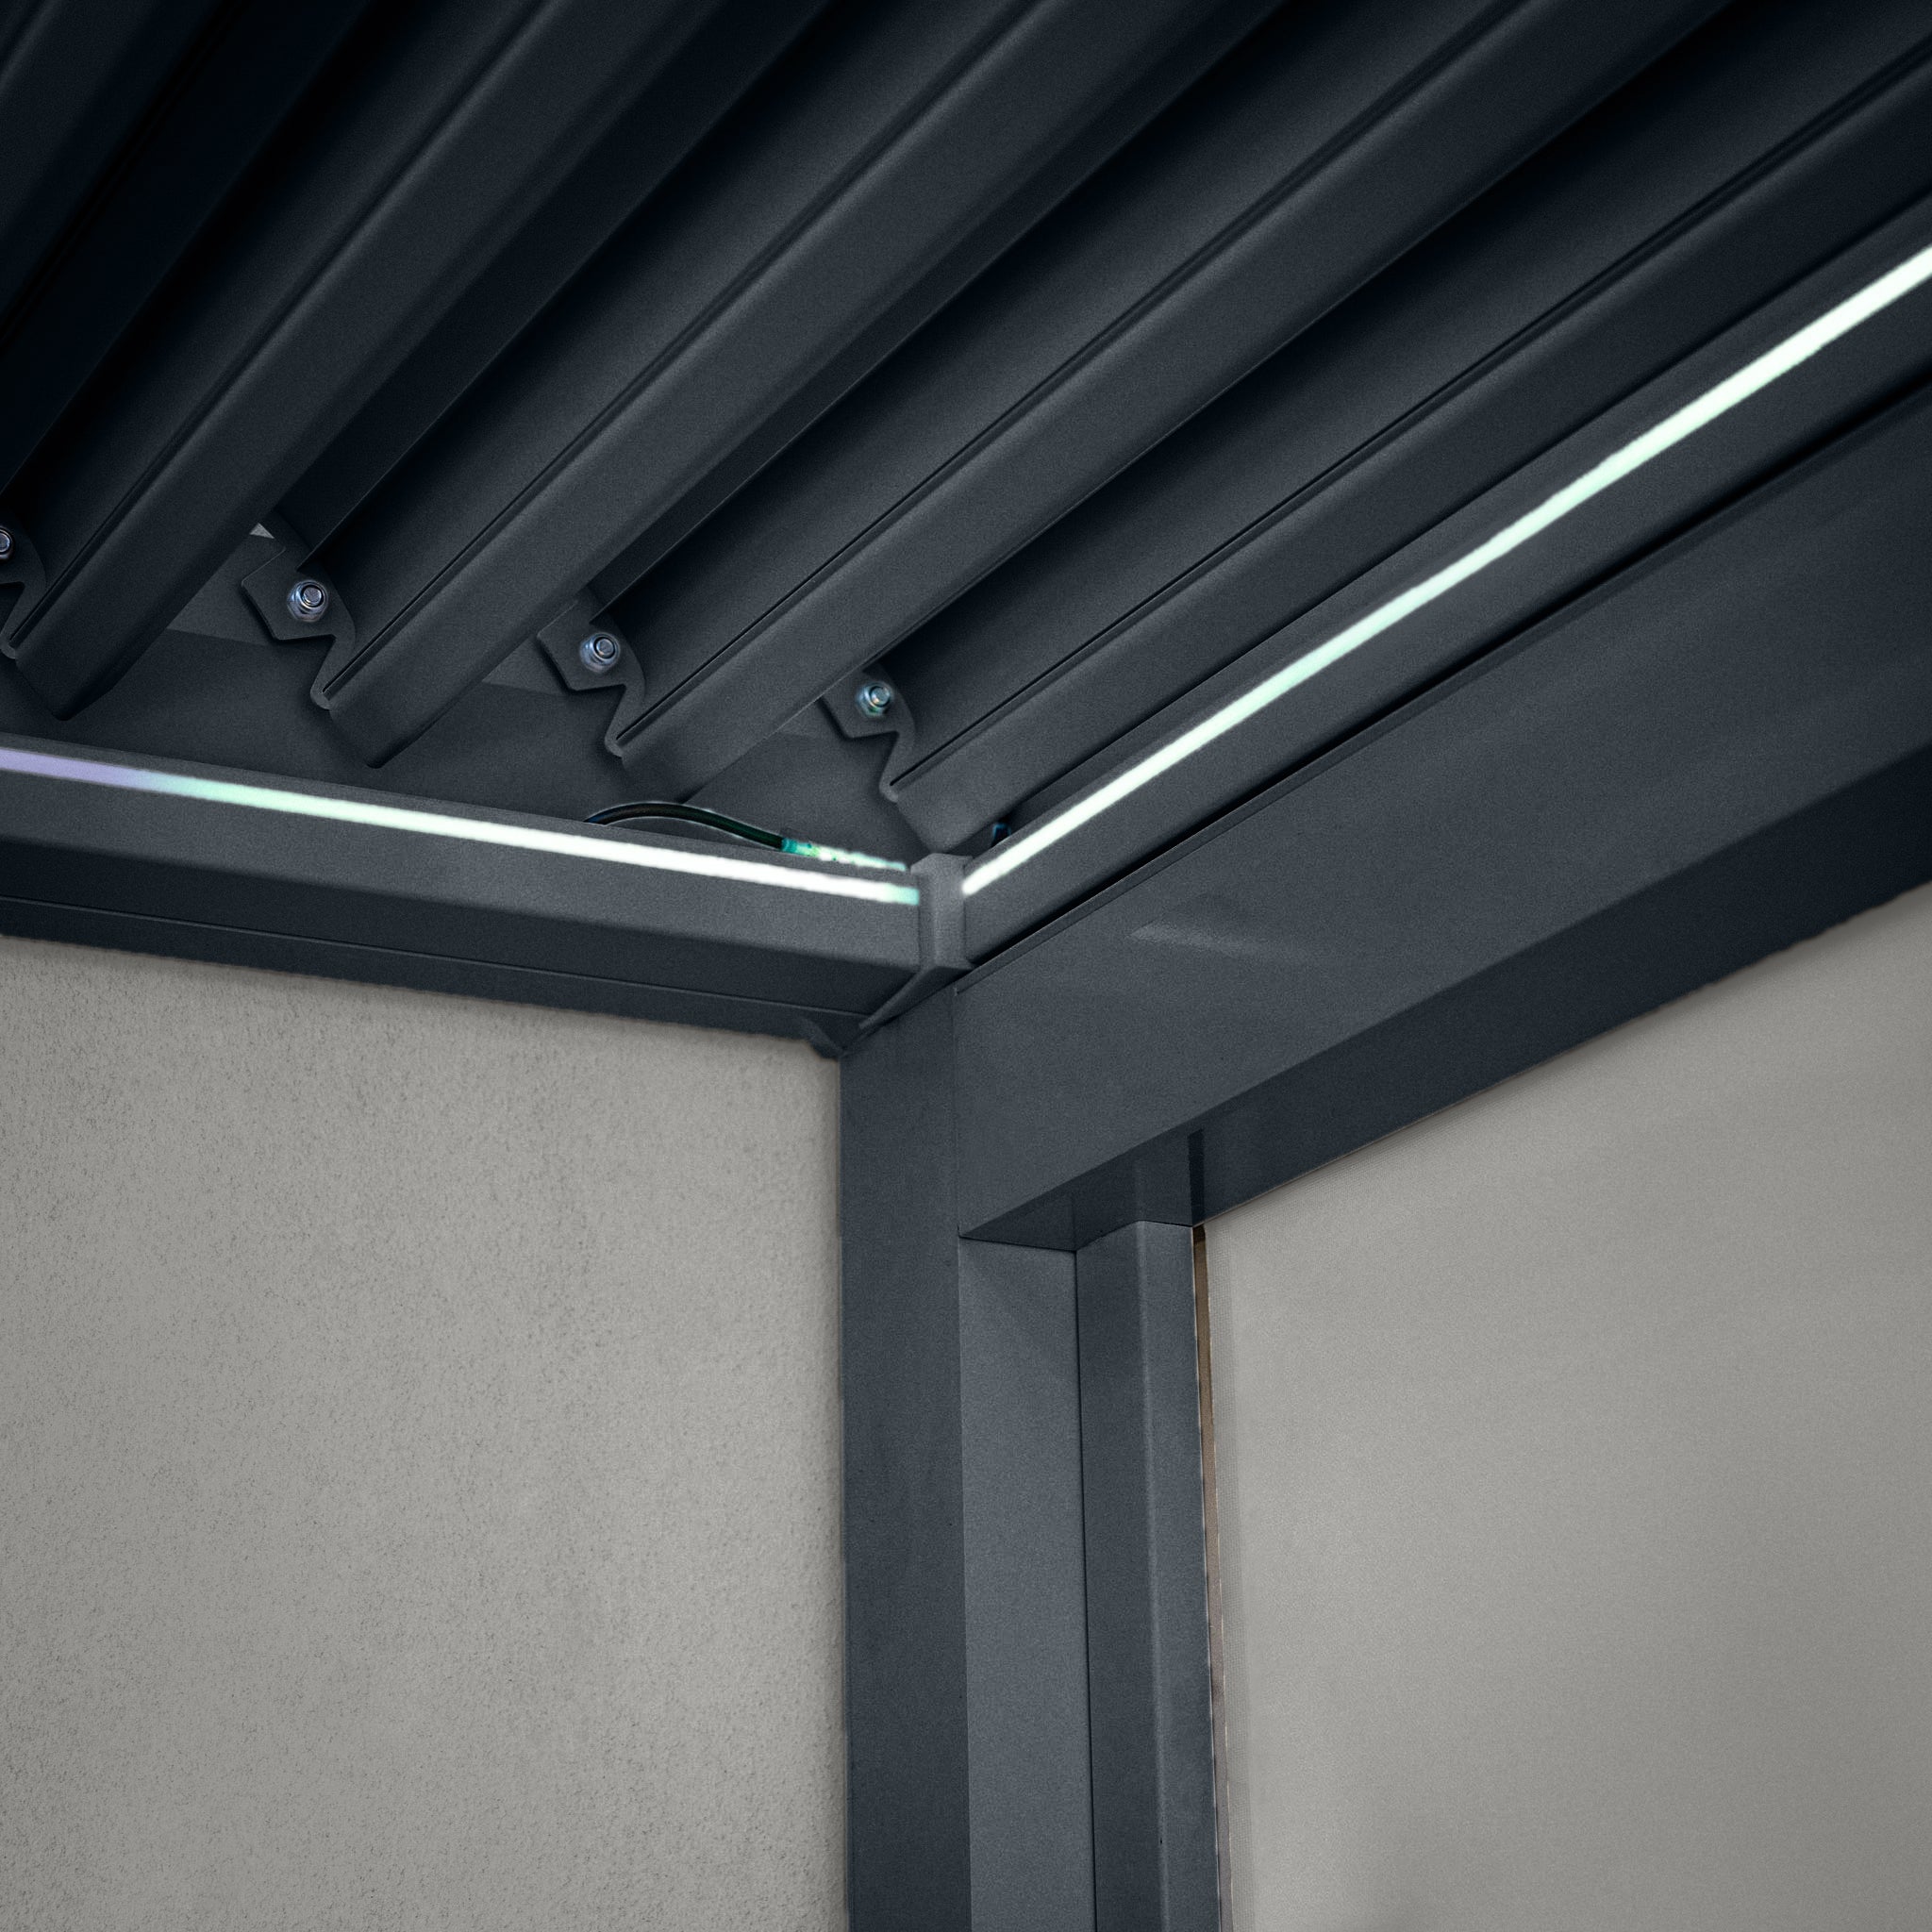 PergoSTET 3m x 3m Square Wall Mounted Pergola with 3 Drop Sides and LED Lighting in Grey